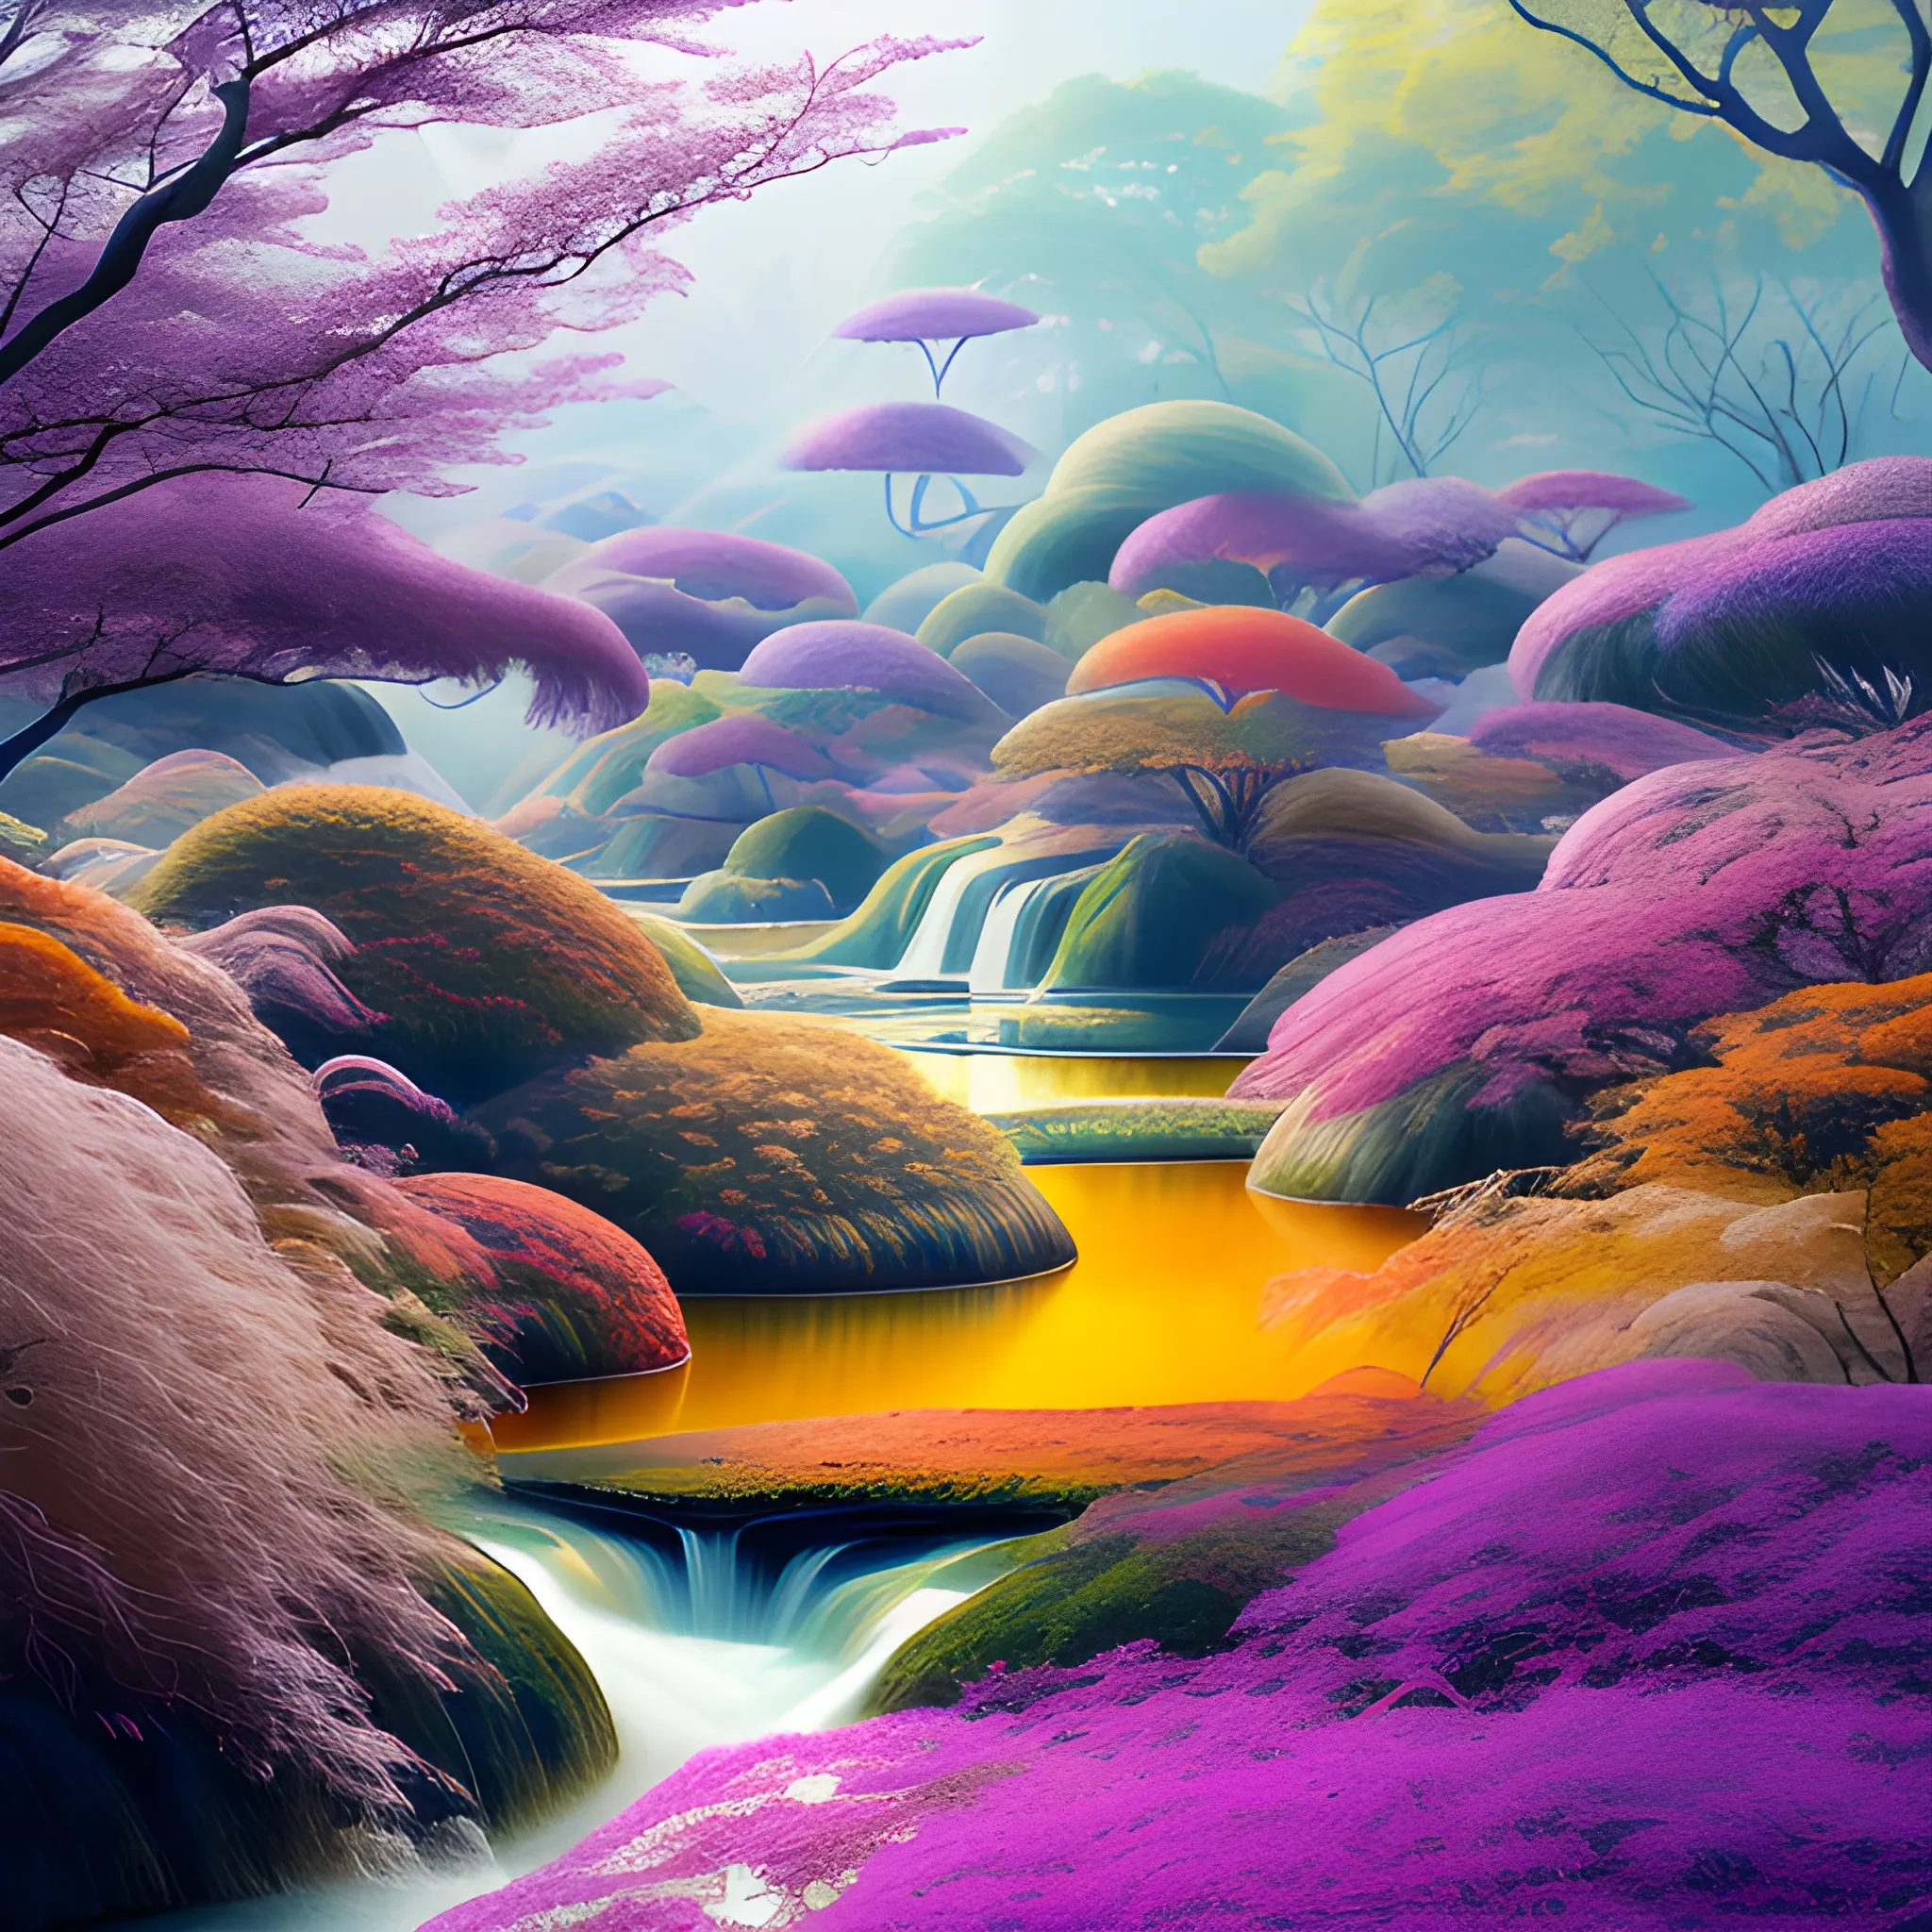 (by Ananta Mandal (and Andrew Biraj:0.5)), (in the style of nihonga), Style: Abstract, Medium: Digital illustration, Subject: An otherworldly landscape with floating islands, cascading waterfalls, and vibrant flora and fauna. Camera Angle: Overhead shot capturing the vastness and intricate details of the scene. The colors are saturated, and the lighting creates a warm and ethereal atmosphere. The painting is highly detailed, with every brushstroke capturing the complexity of the imaginary world., (high quality), (detailed), (masterpiece), (best quality), (highres), (extremely detailed), (8k), seed:1015789